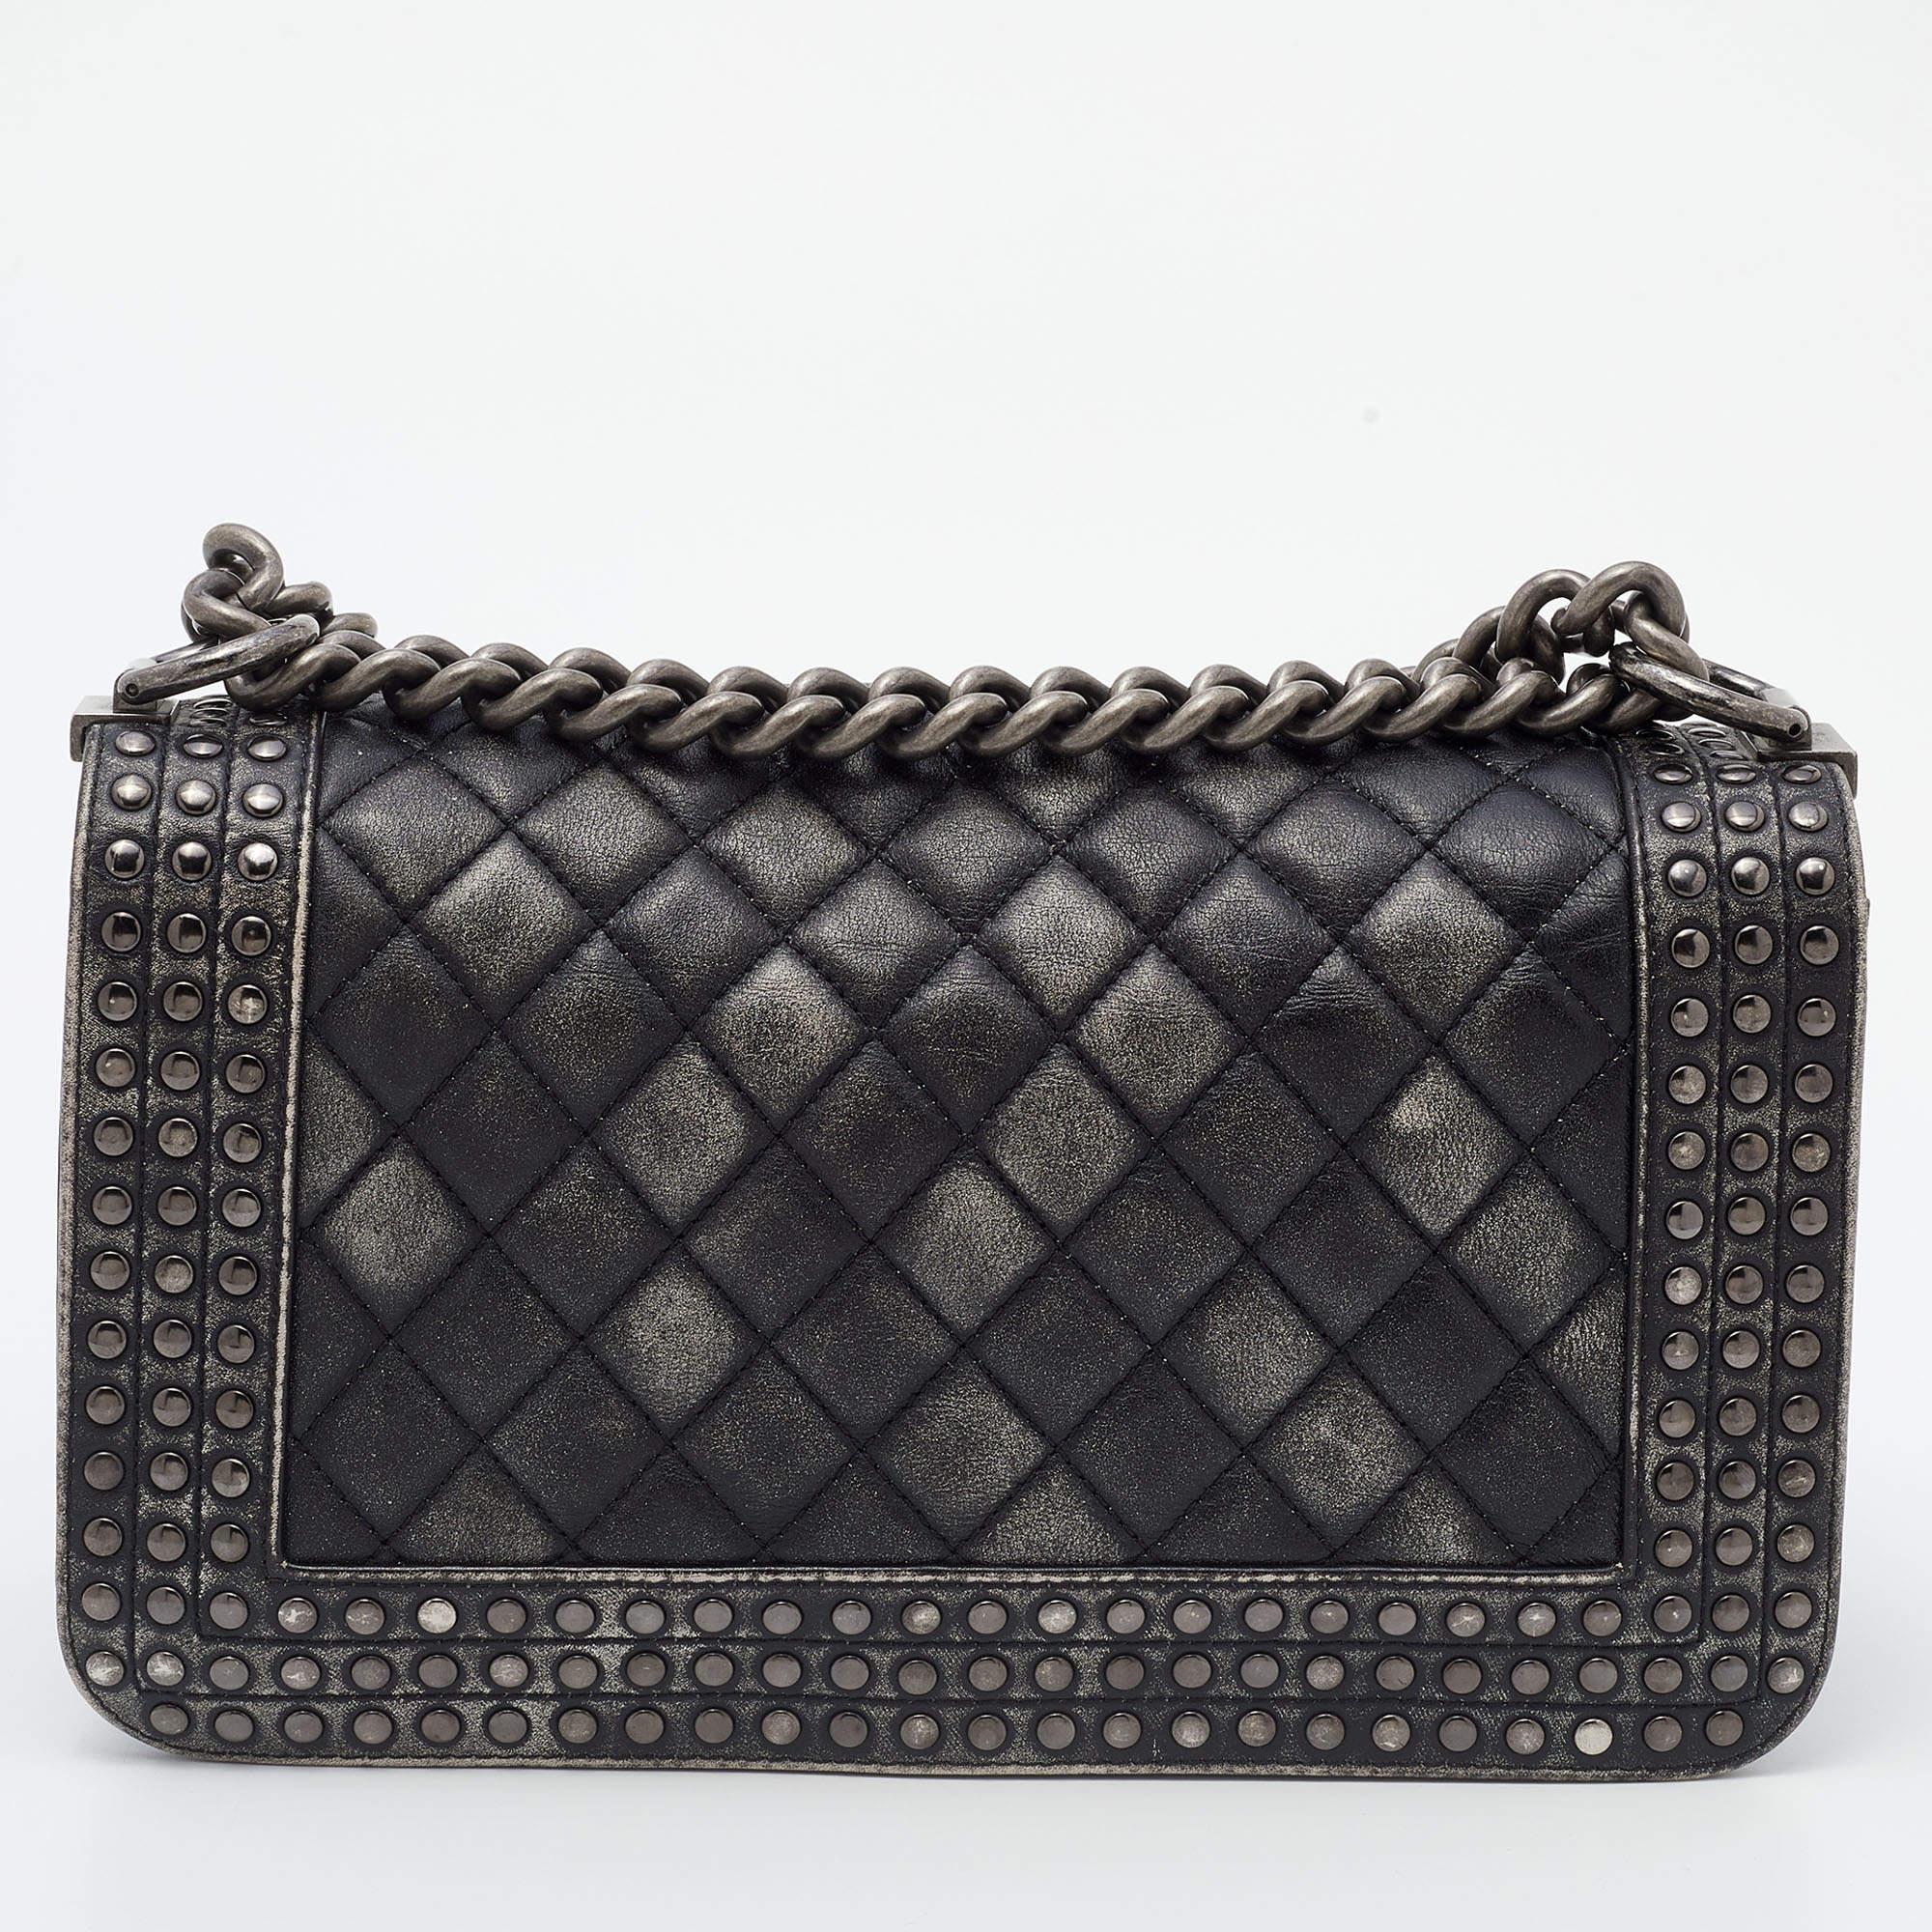 Designed to last, this beautiful Chanel Boy bag is a prized buy. Comfortable and easy to carry, this handy creation comes with an interior sized to keep your essentials organized and safe.

Includes: Original Dustbag

